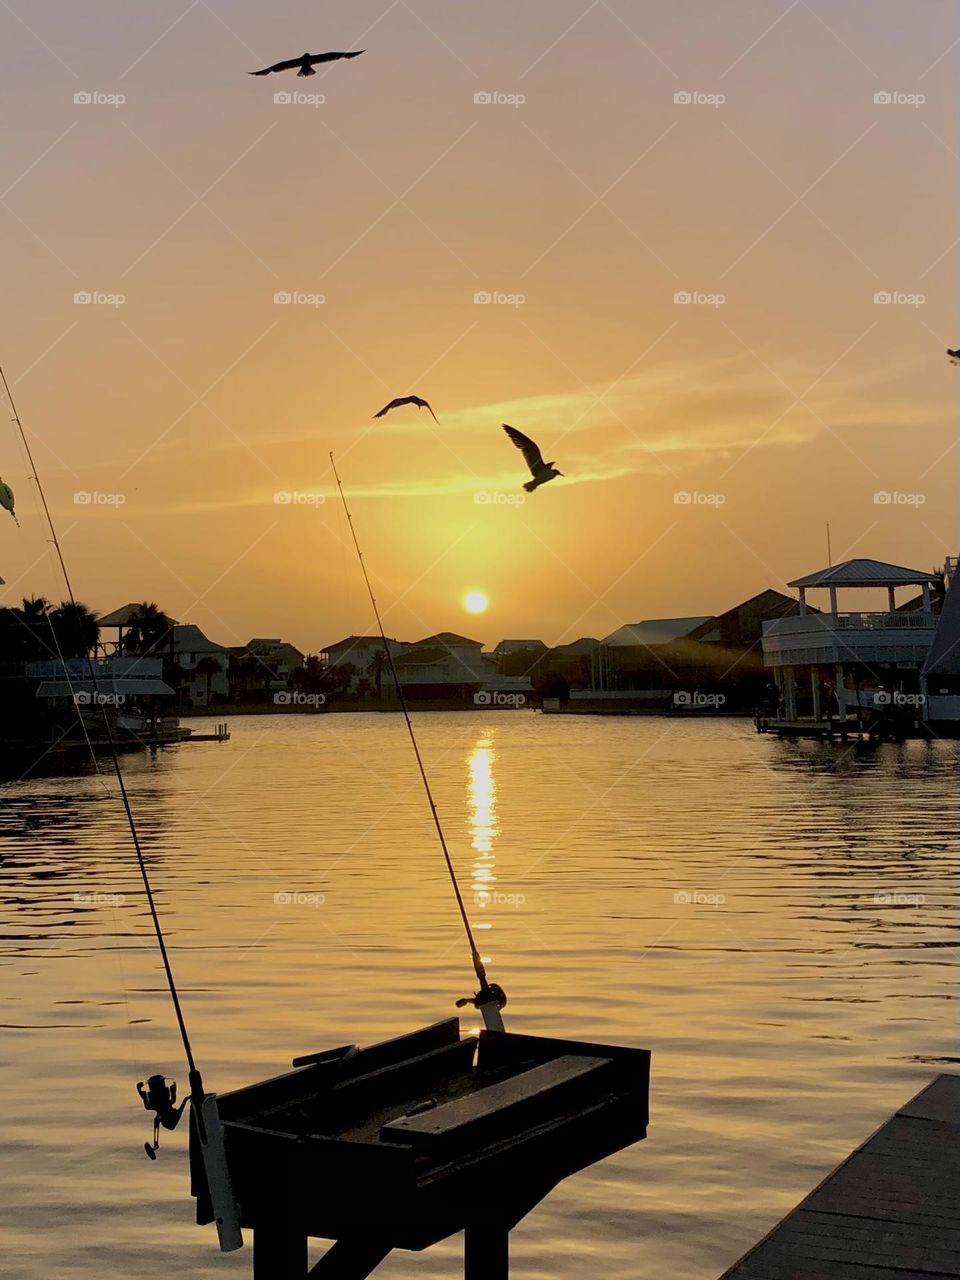 Summertime for us is fishing off the dock at sunset and watching the seagulls fly my! ☀️